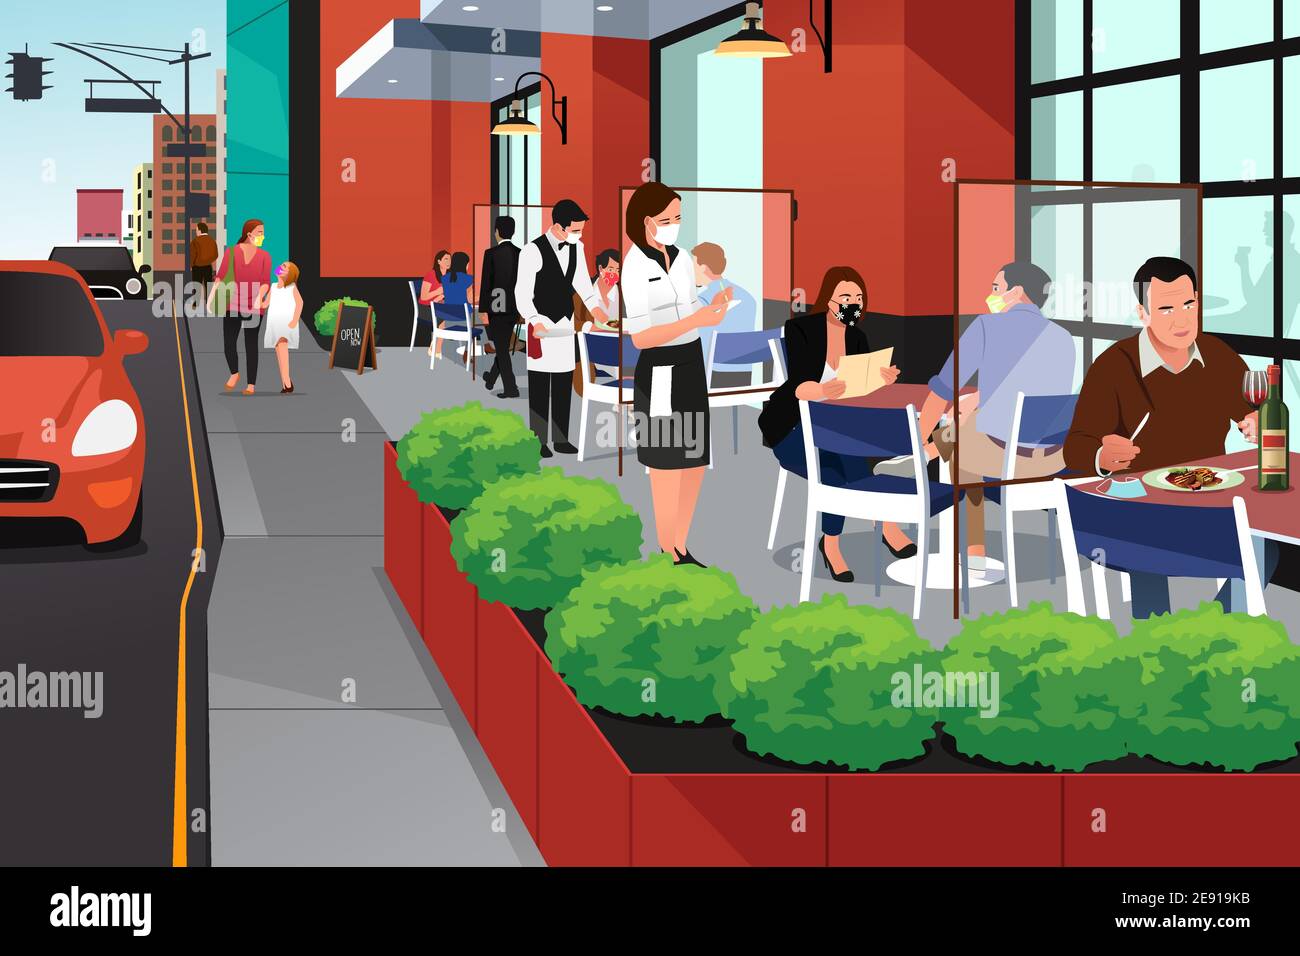 A vector illustration of People Eating Outdoor at Restaurant During Pandemic Stock Vector